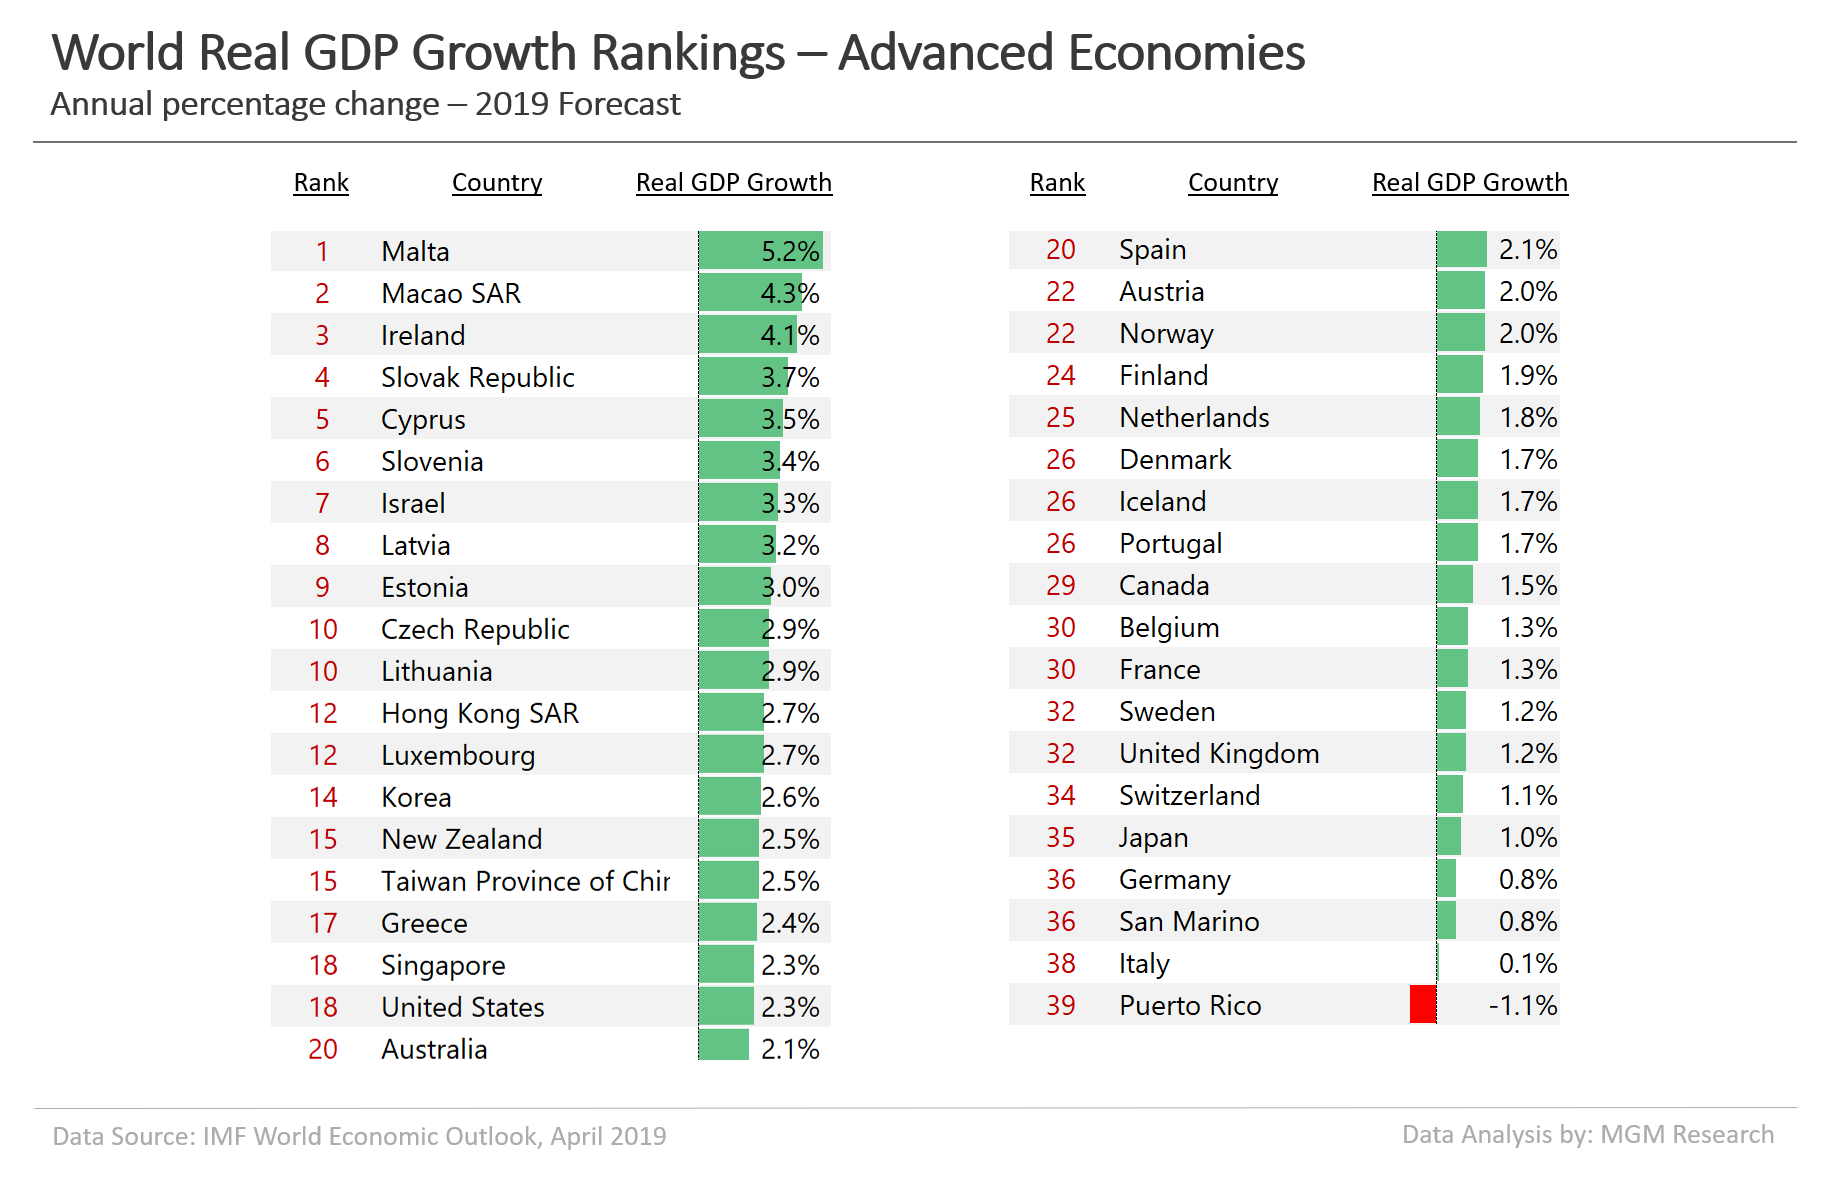 Advanced economies real GDP growth rankings 2019